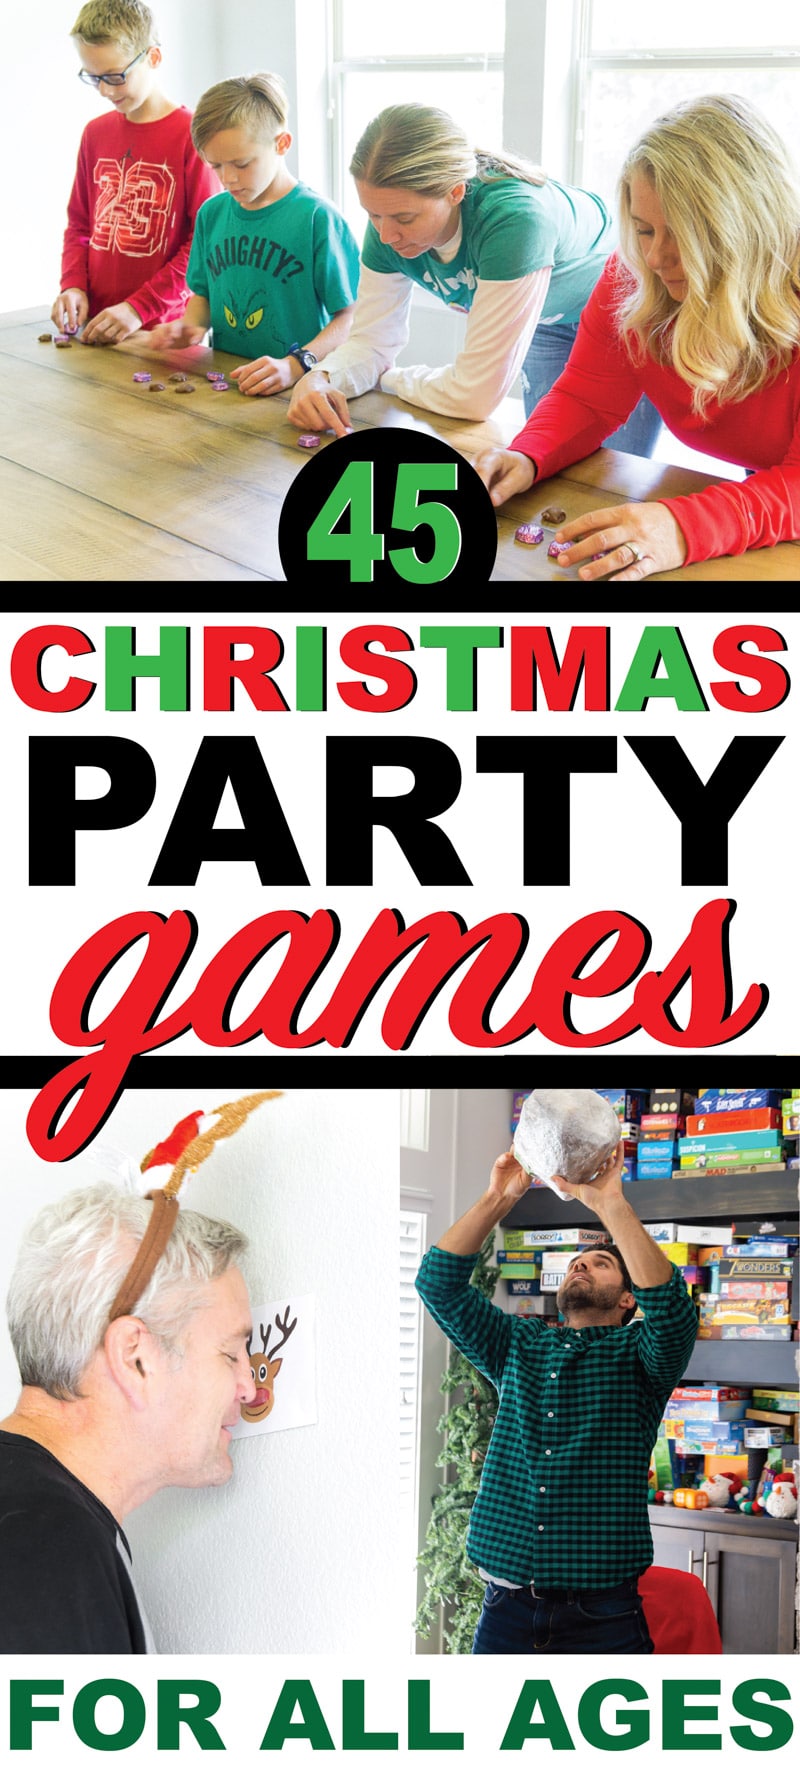 christmas-party-games-for-adults